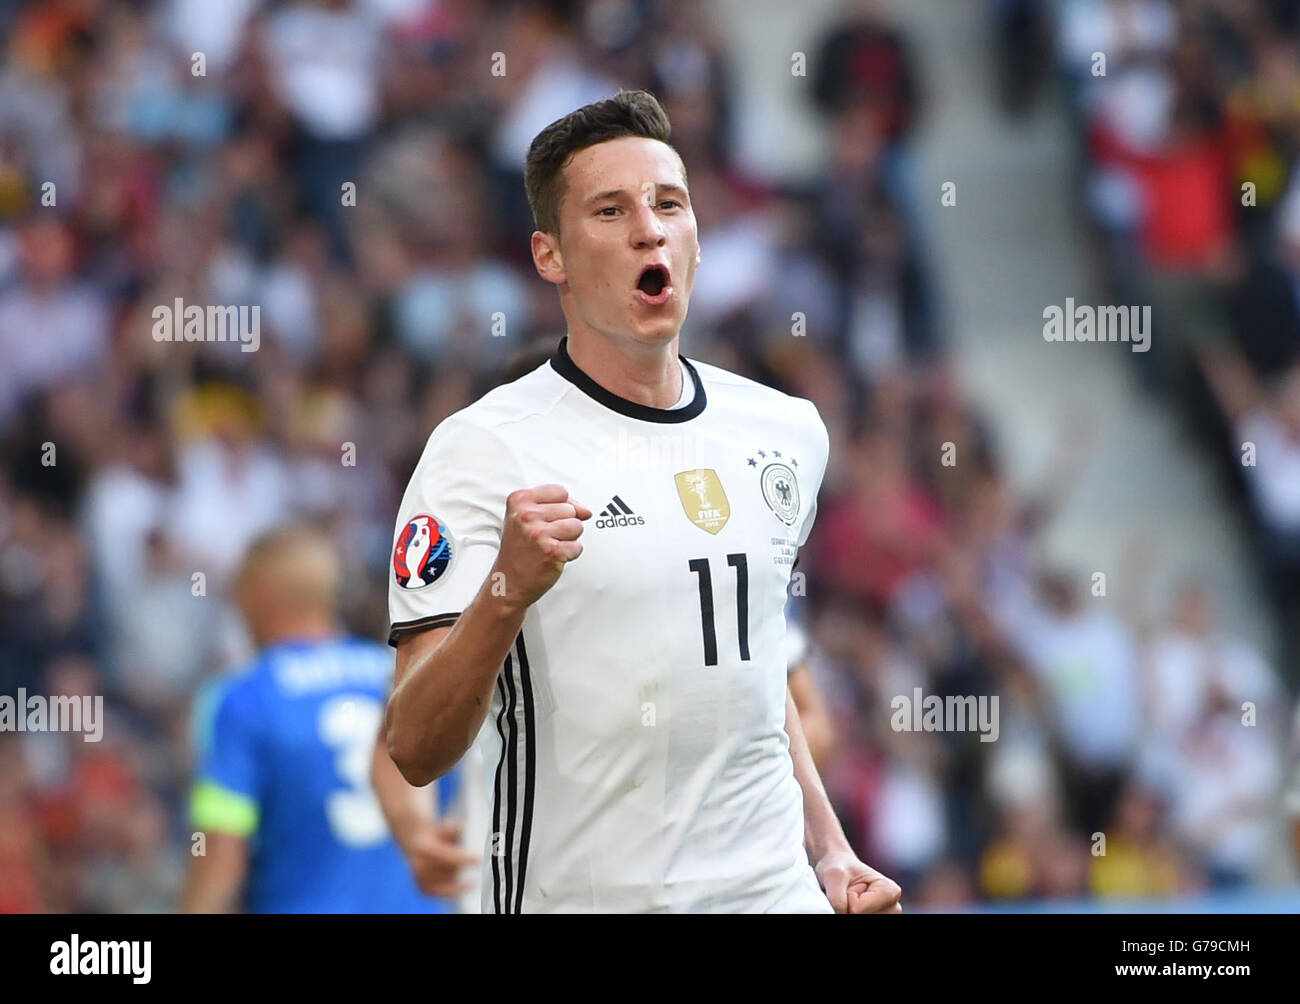 Lille, France. 26th June, 2016. Julian Draxler of Germany celebrates scoring during the Euro 2016 round of 16 football match between Germany and Slovakia in Lille, France, June 26, 2016. Credit:  Tao Xiyi/Xinhua/Alamy Live News Stock Photo